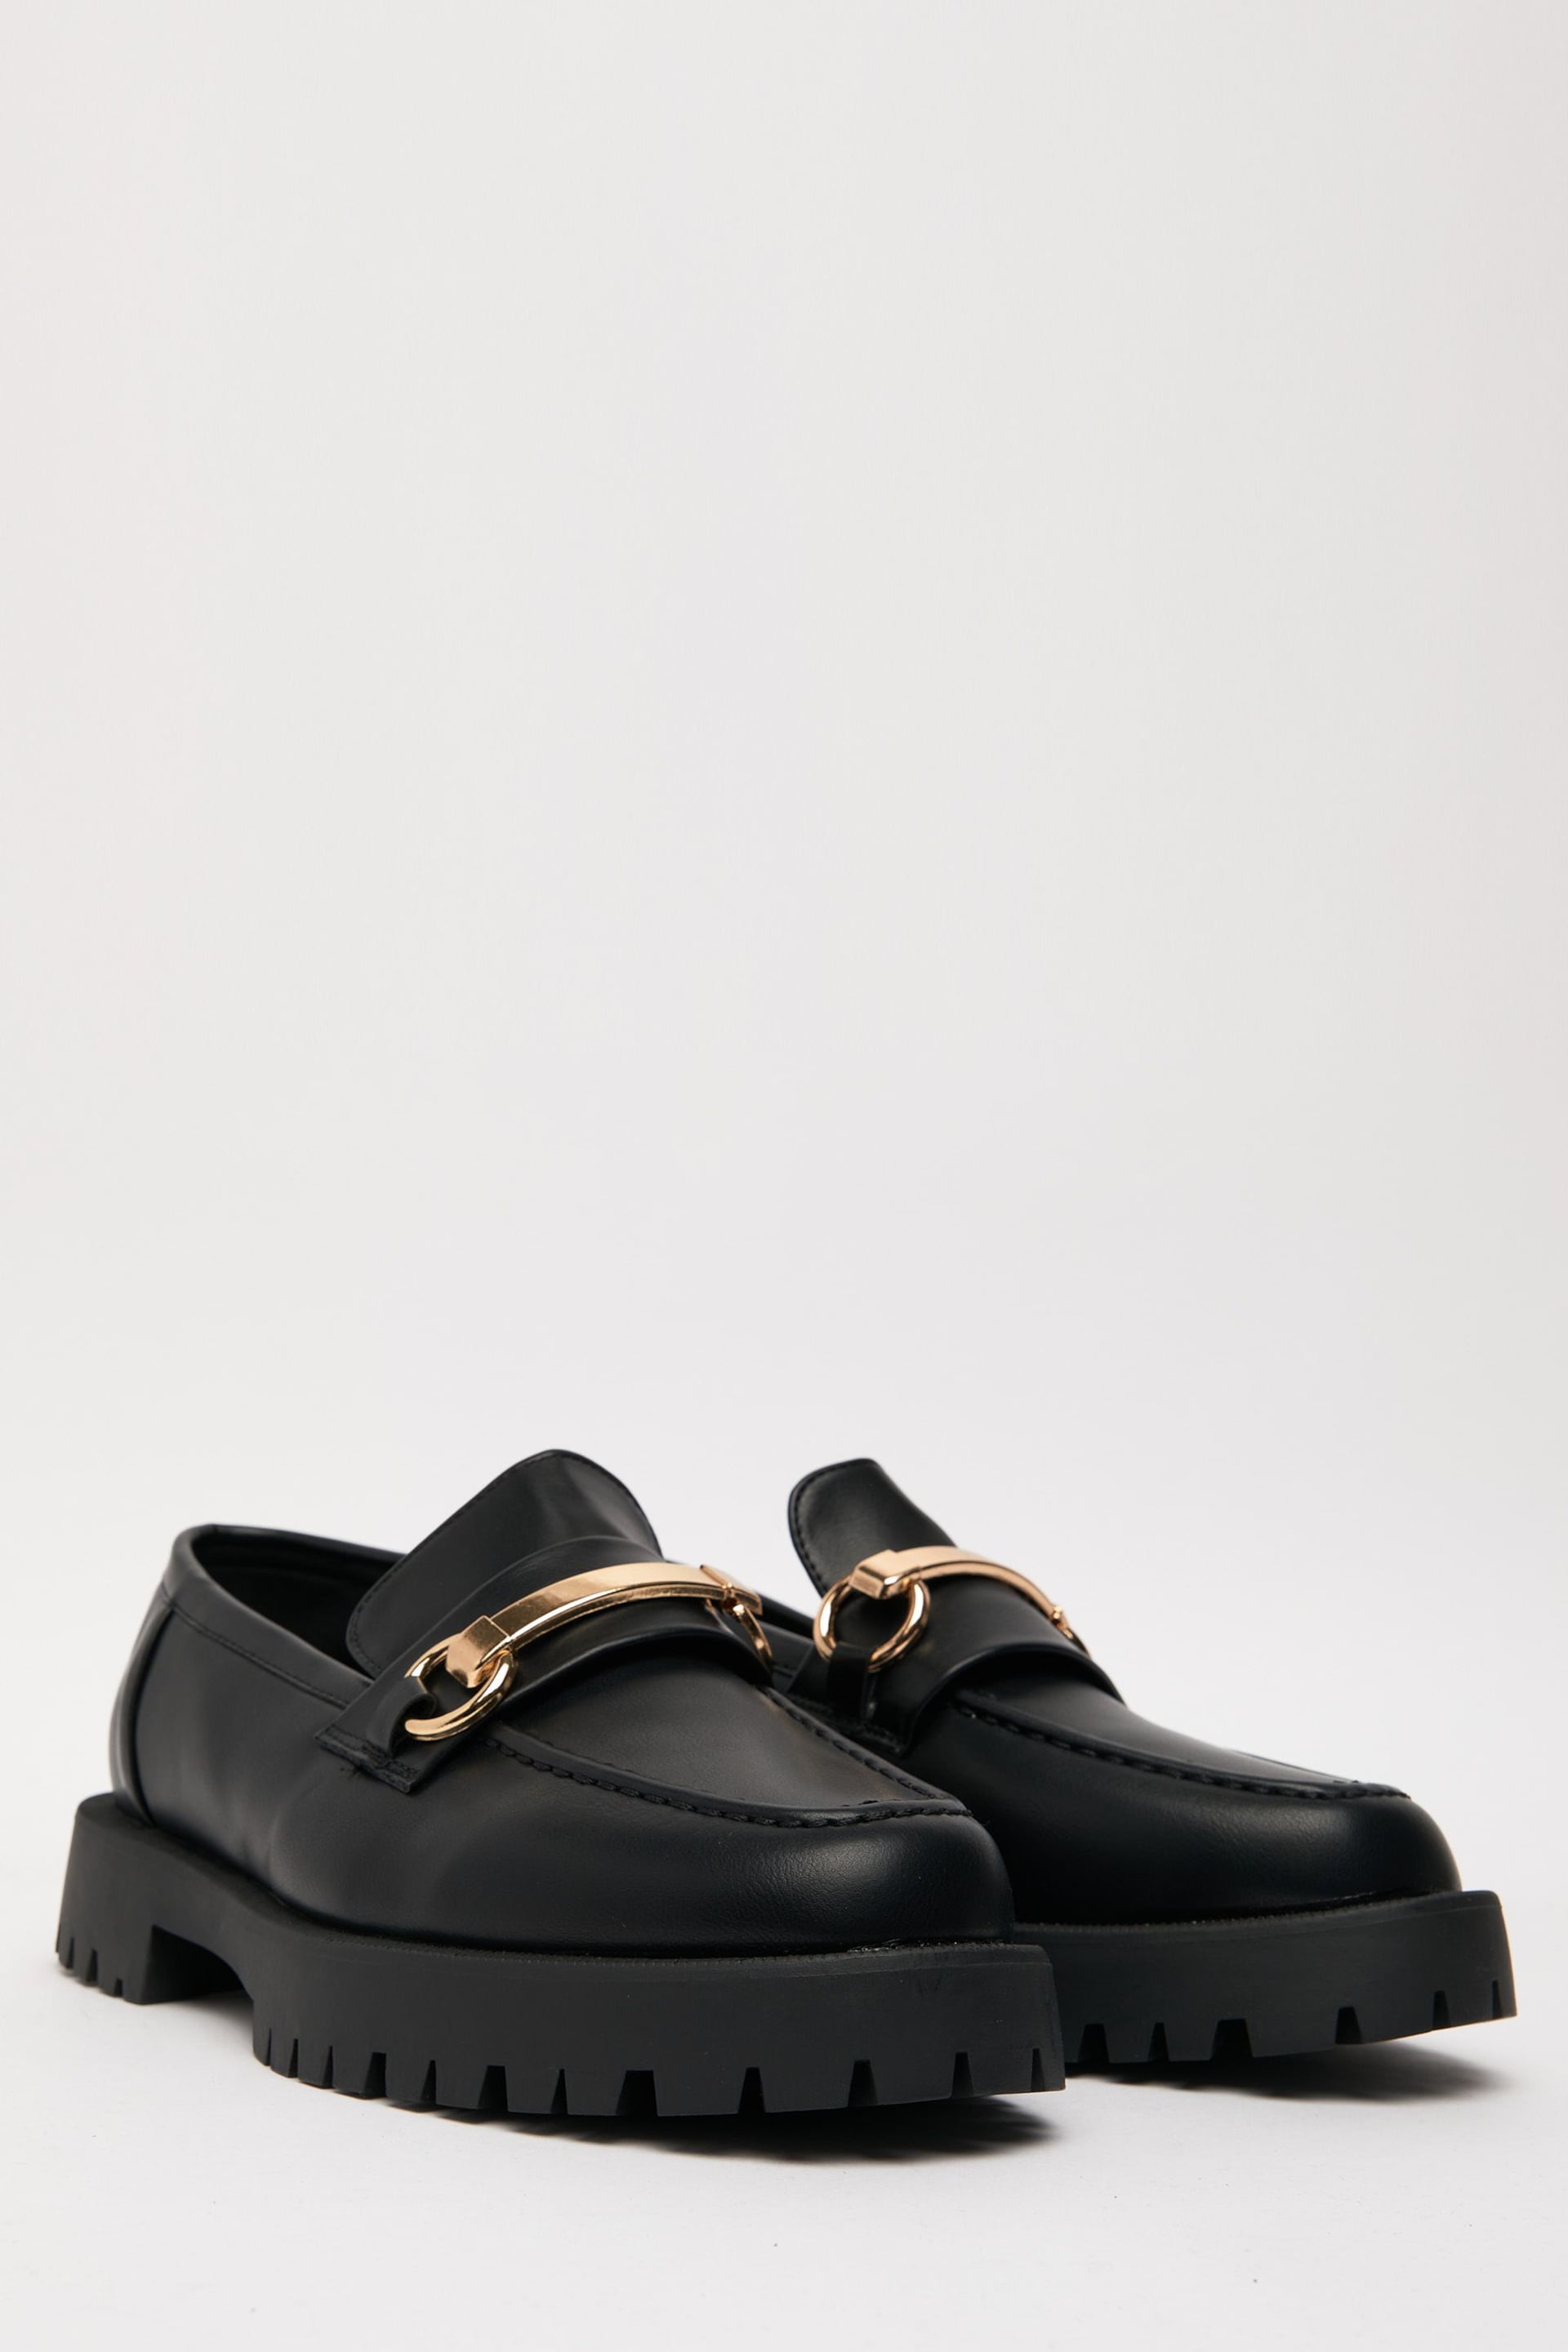 Schuh Wide Fit Lawrence Black Loafers - Image 2 of 4